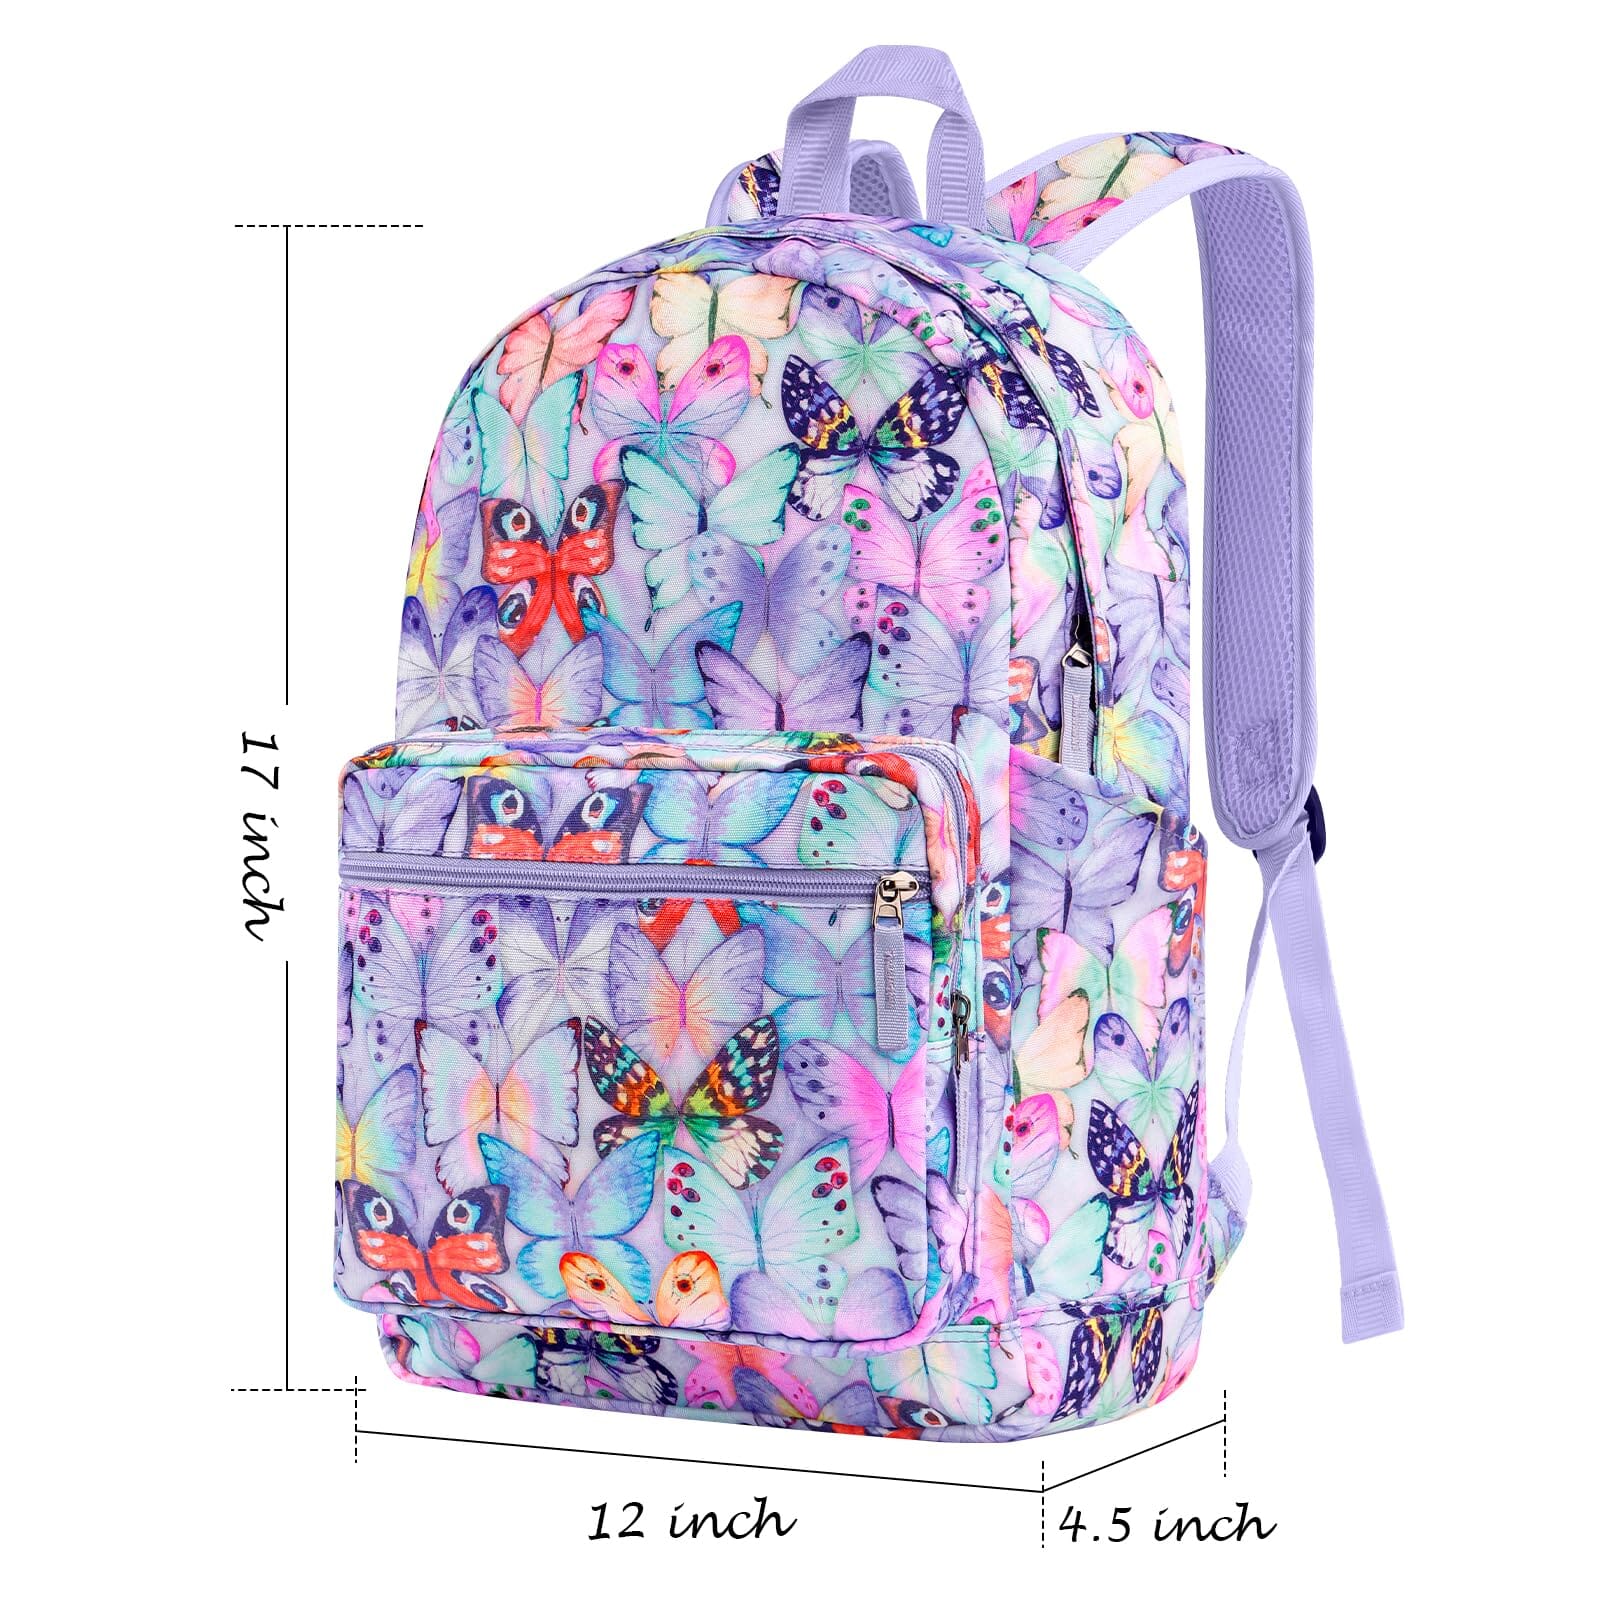 Choco Mocha Butterfly Backpack for Girls Travel School Backpack 17 Inch, Colorful chocomochakids 